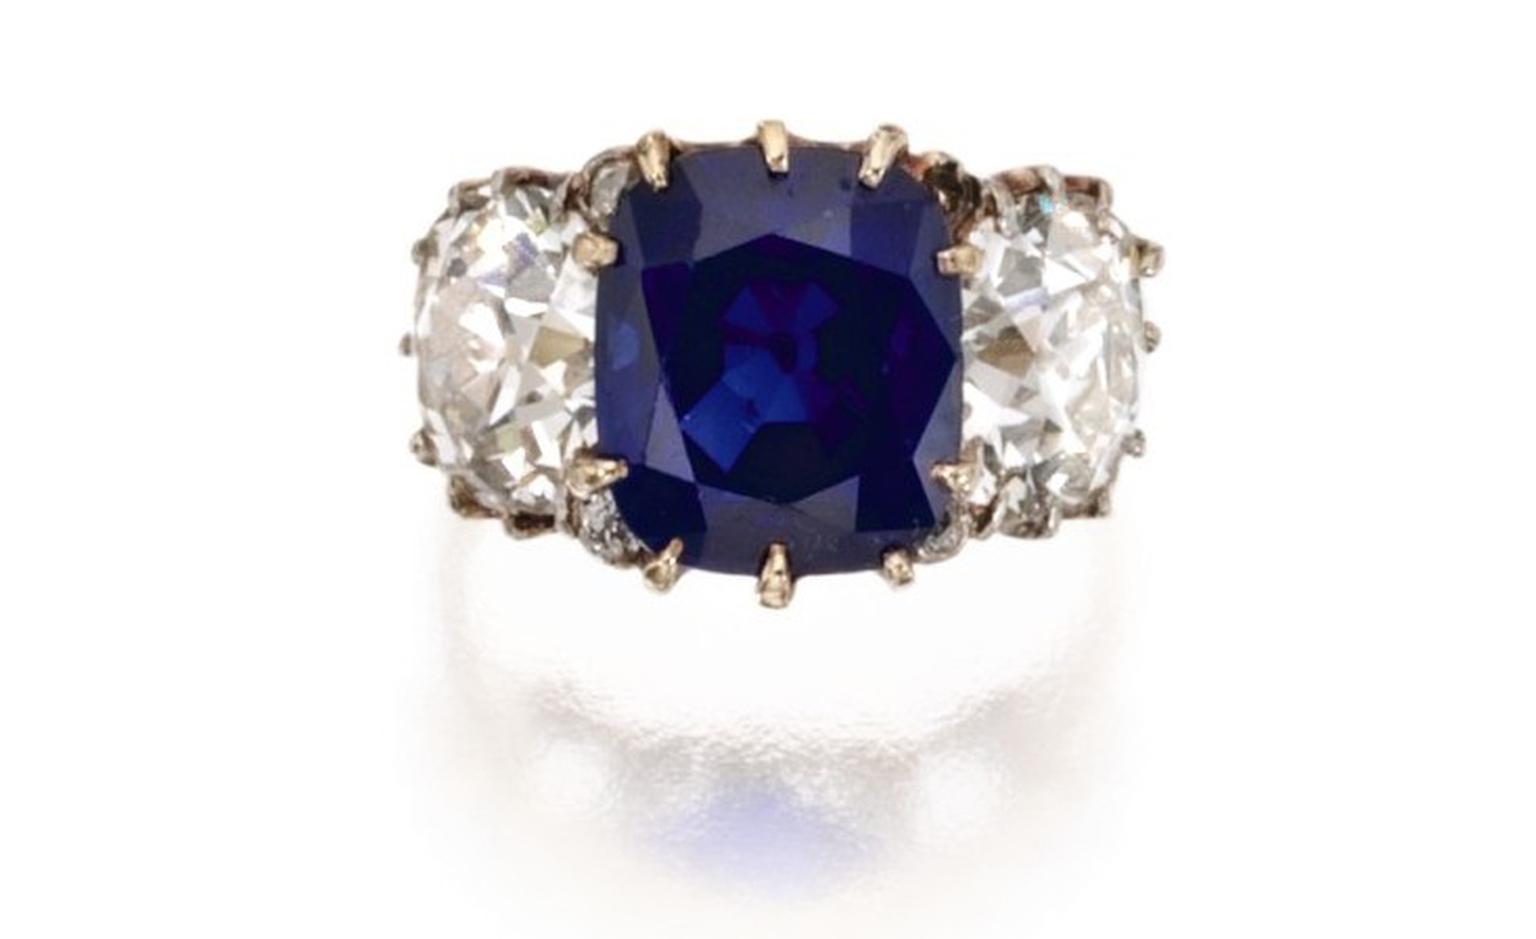 Lot 186 Gold, Platinum, Sapphire and Diamond Ring, Circa 1900 Est. $125/150,000. SOLD FOR 458,500